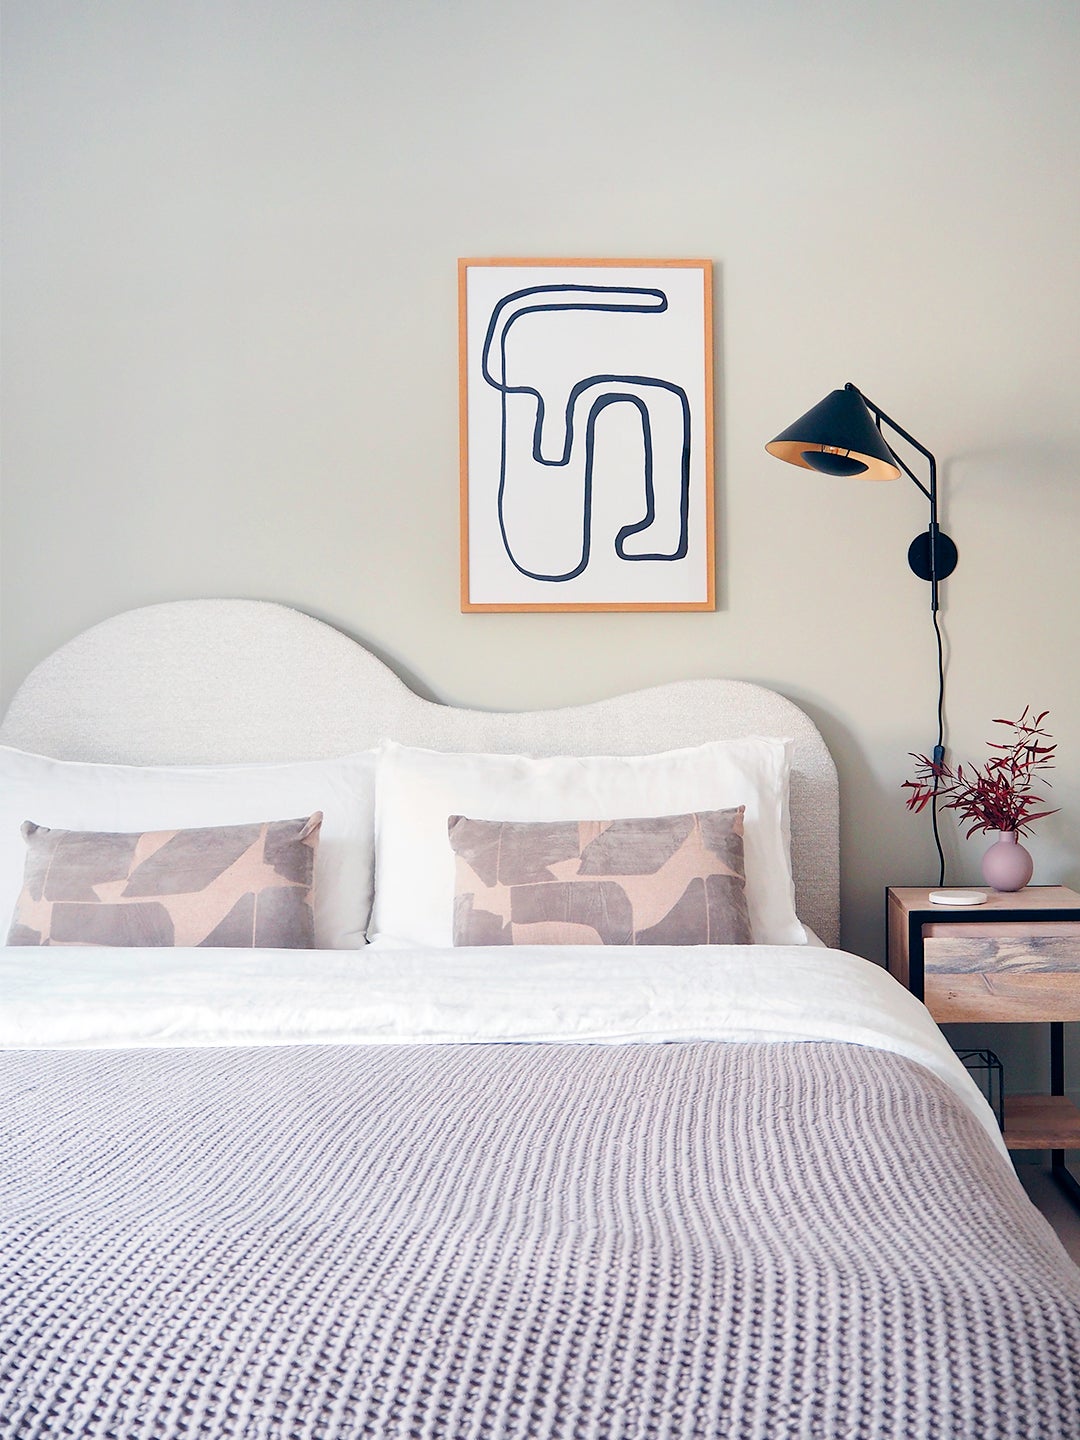 A 275 Diy Headboard To Get You In On